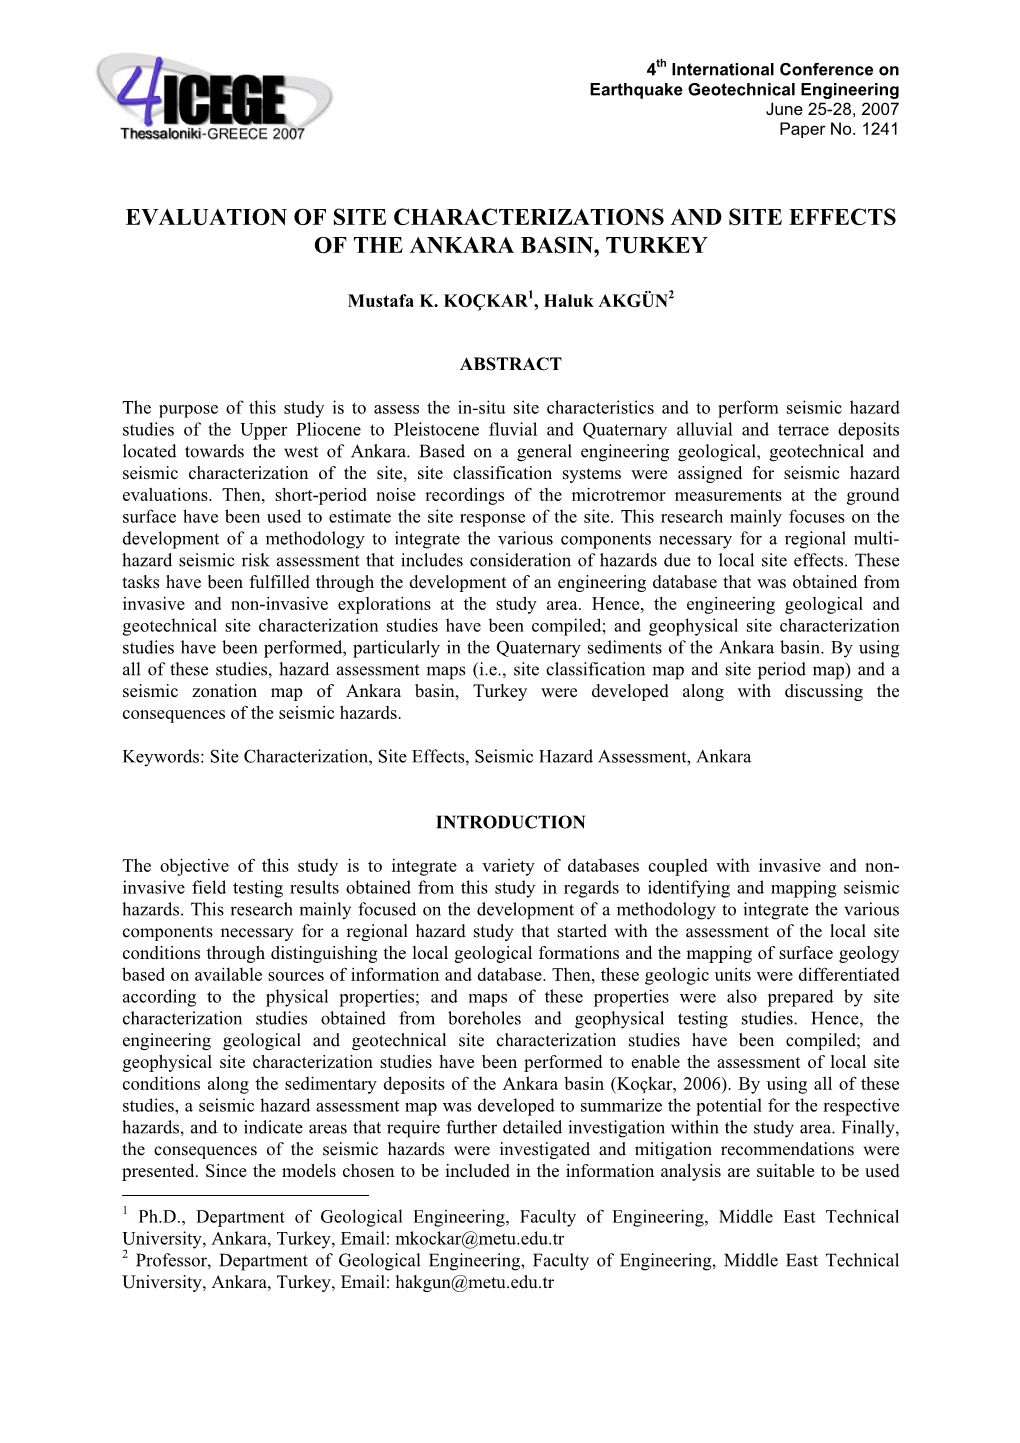 Evaluation of Site Characterizations and Site Effects of the Ankara Basin, Turkey